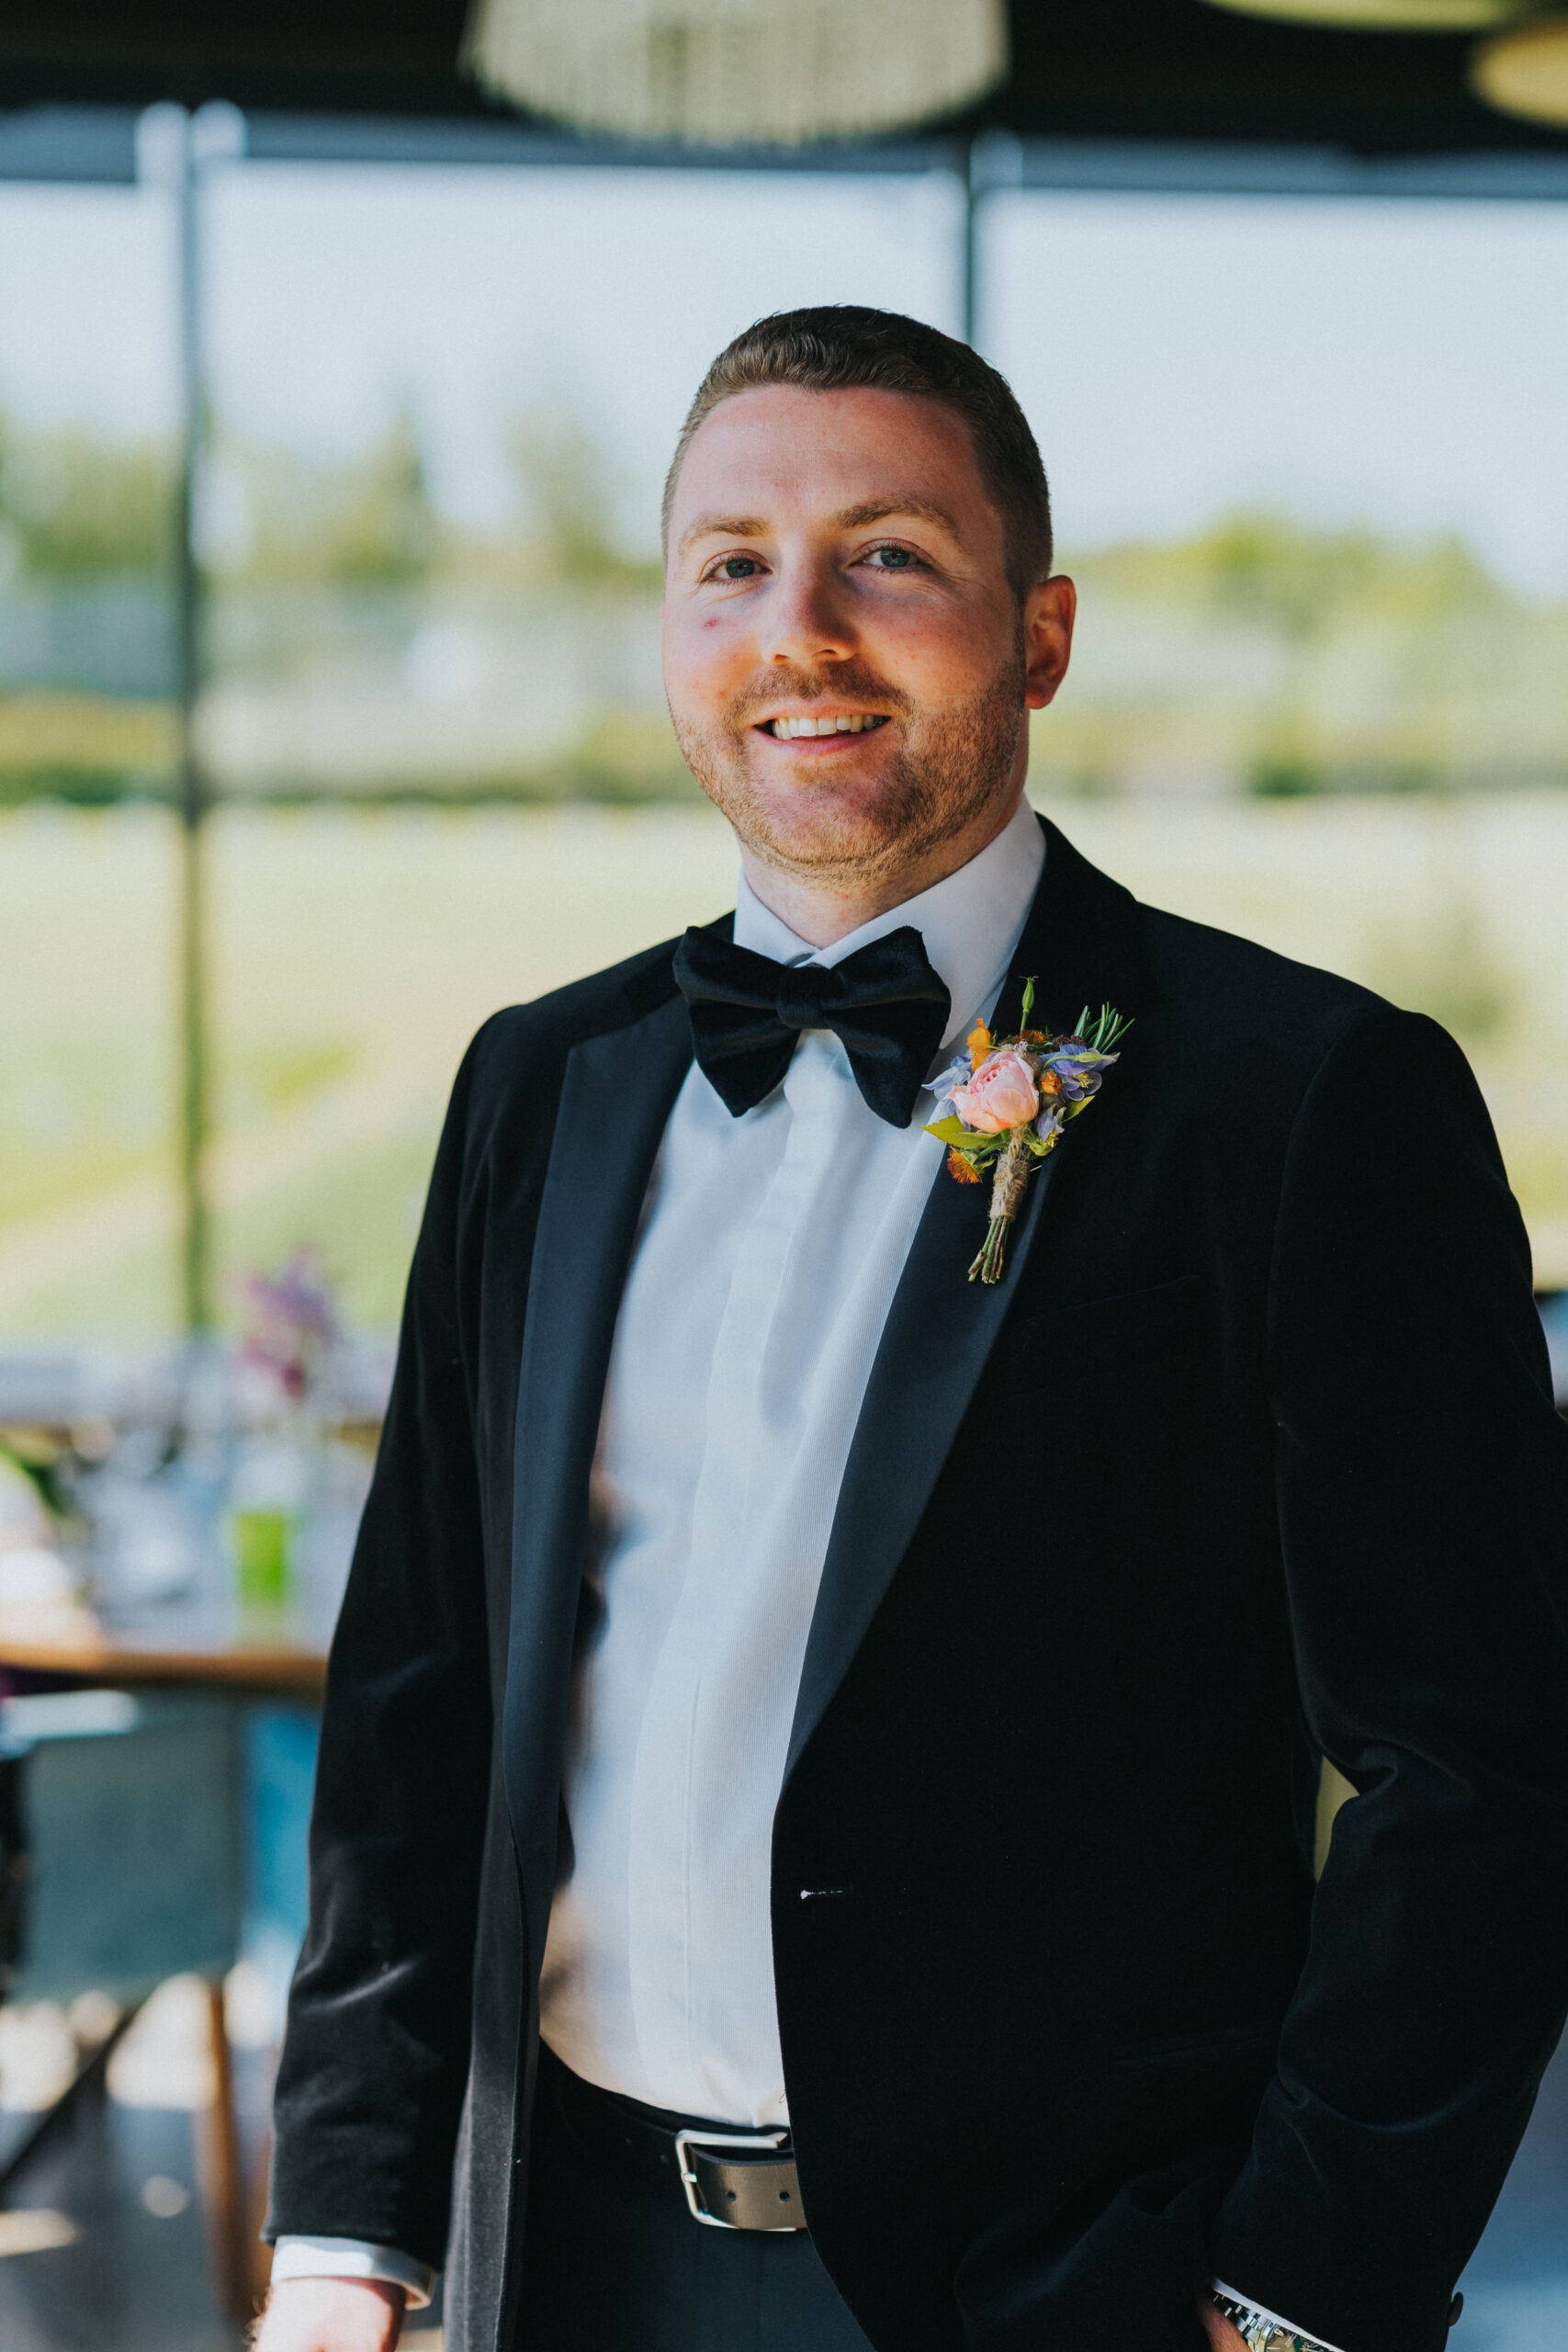 groom smiling at the camera